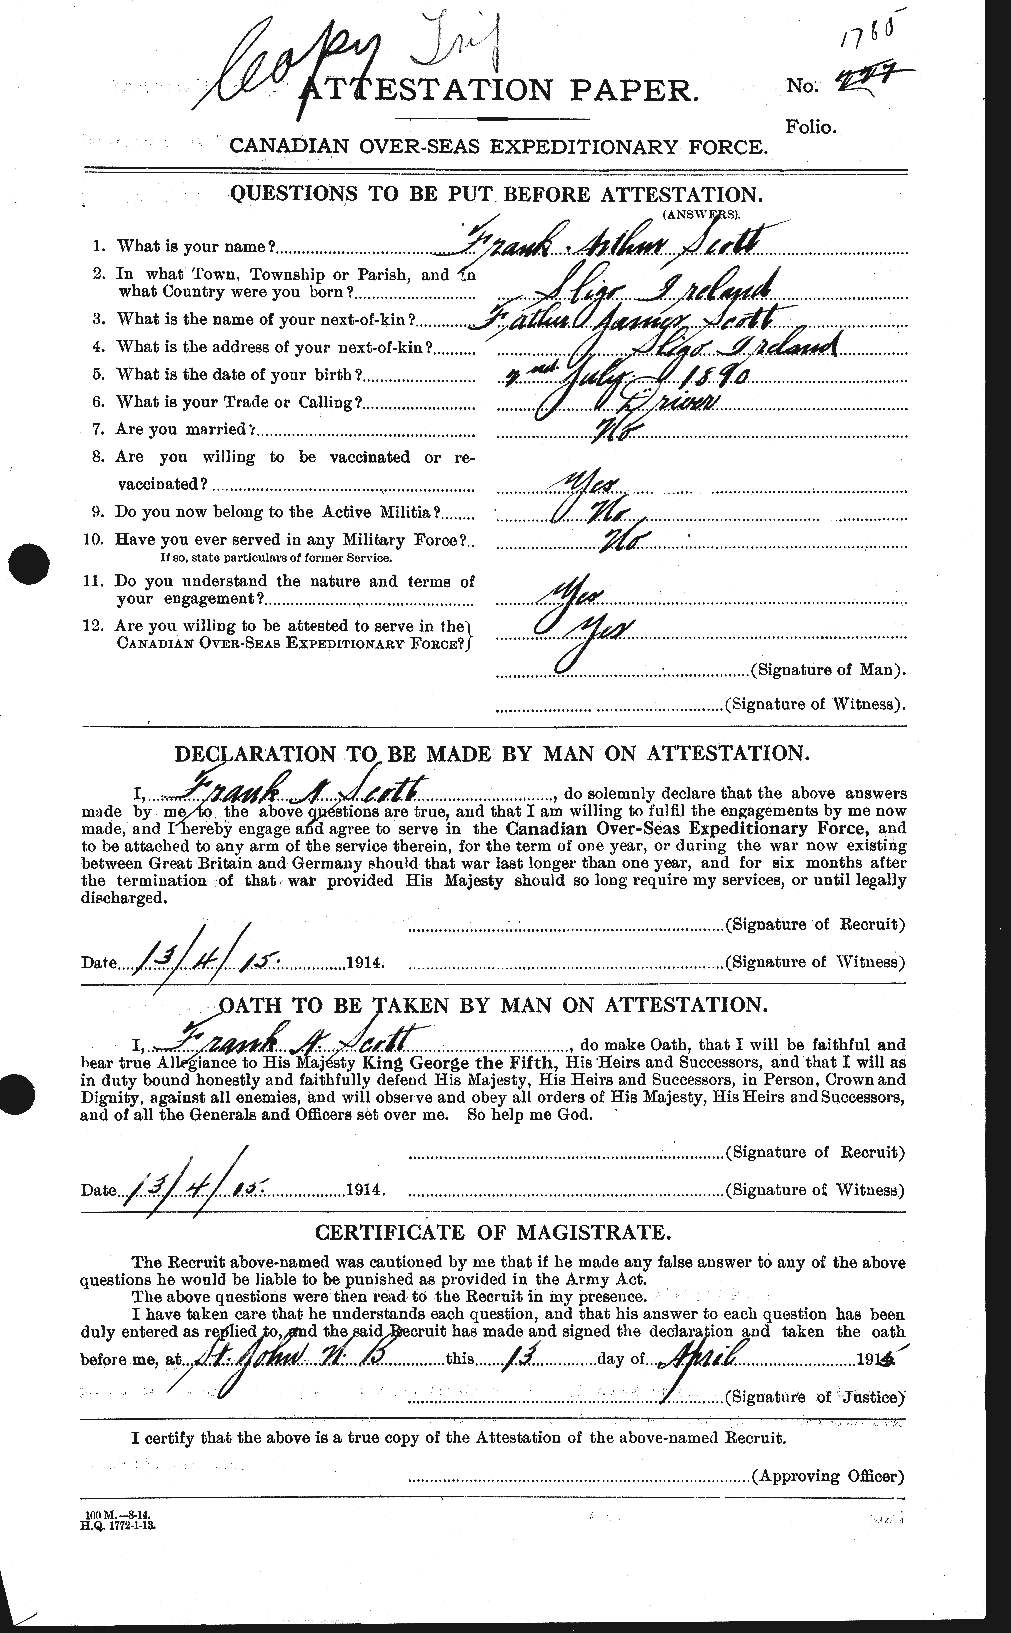 Personnel Records of the First World War - CEF 084706a